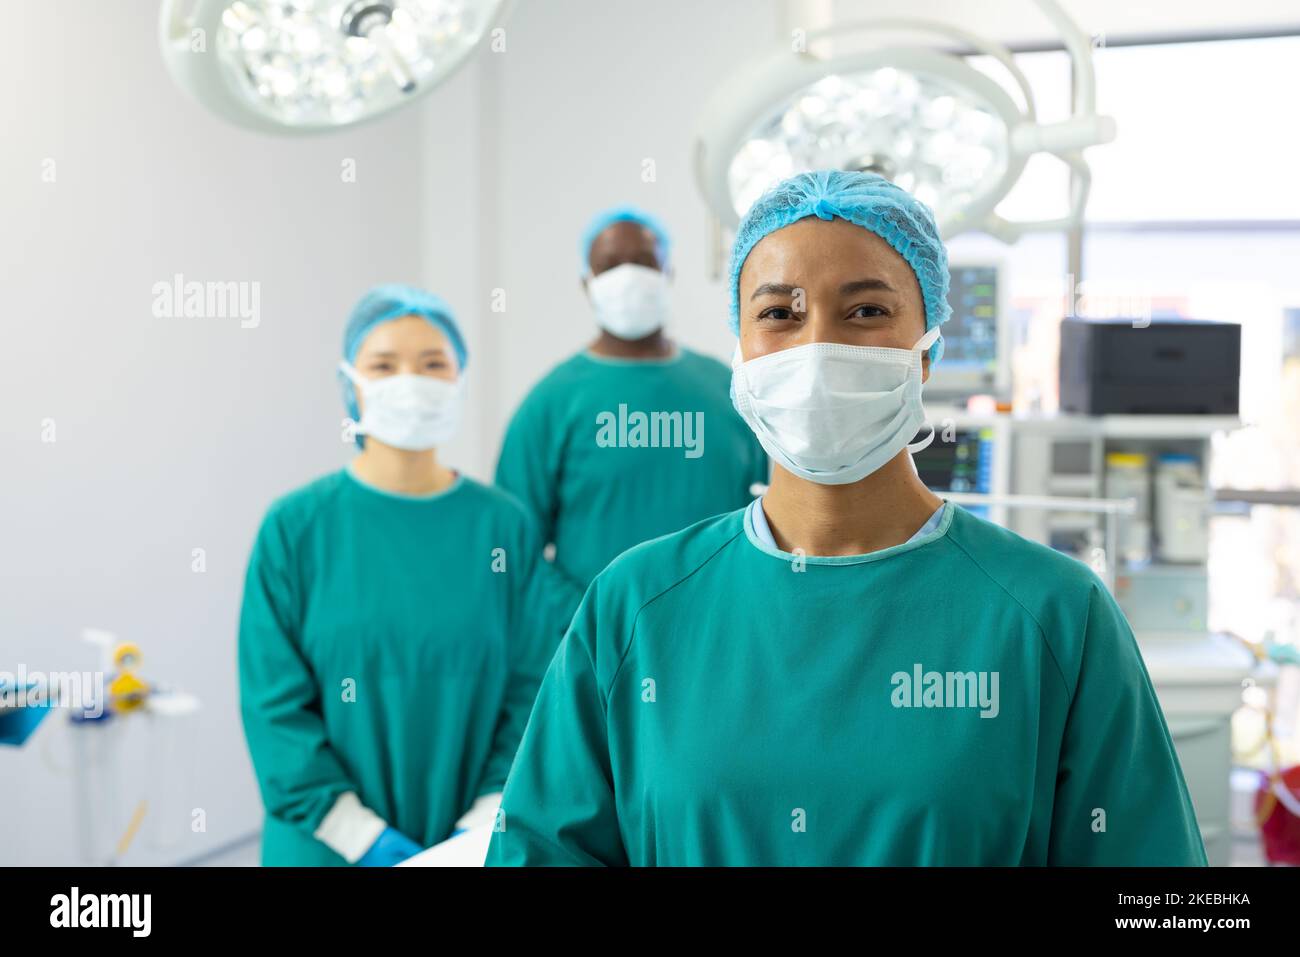 Portrait of smiling biracial female surgeon in mask and cap in operating theatre with colleagues. Hospital, medical and healthcare services. Stock Photo